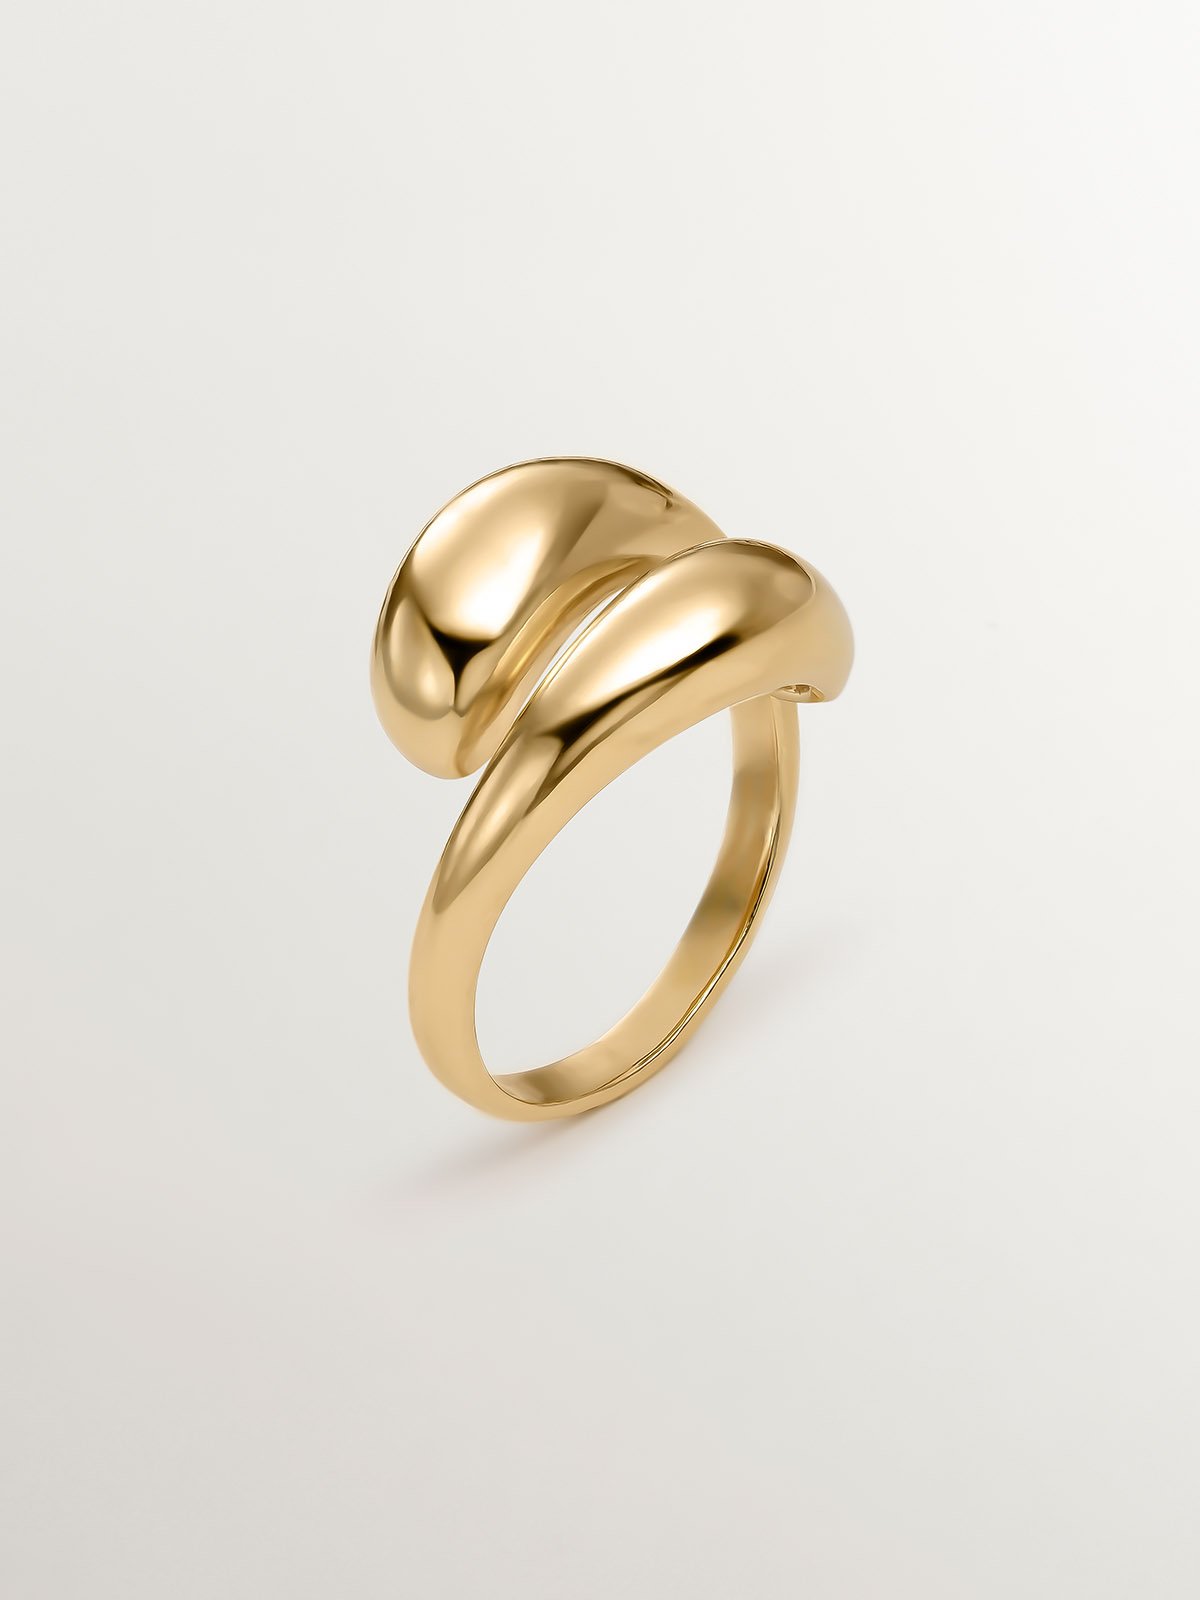 You and Me ring made of 925 silver, bathed in 18K yellow gold with a domed spiral shape.